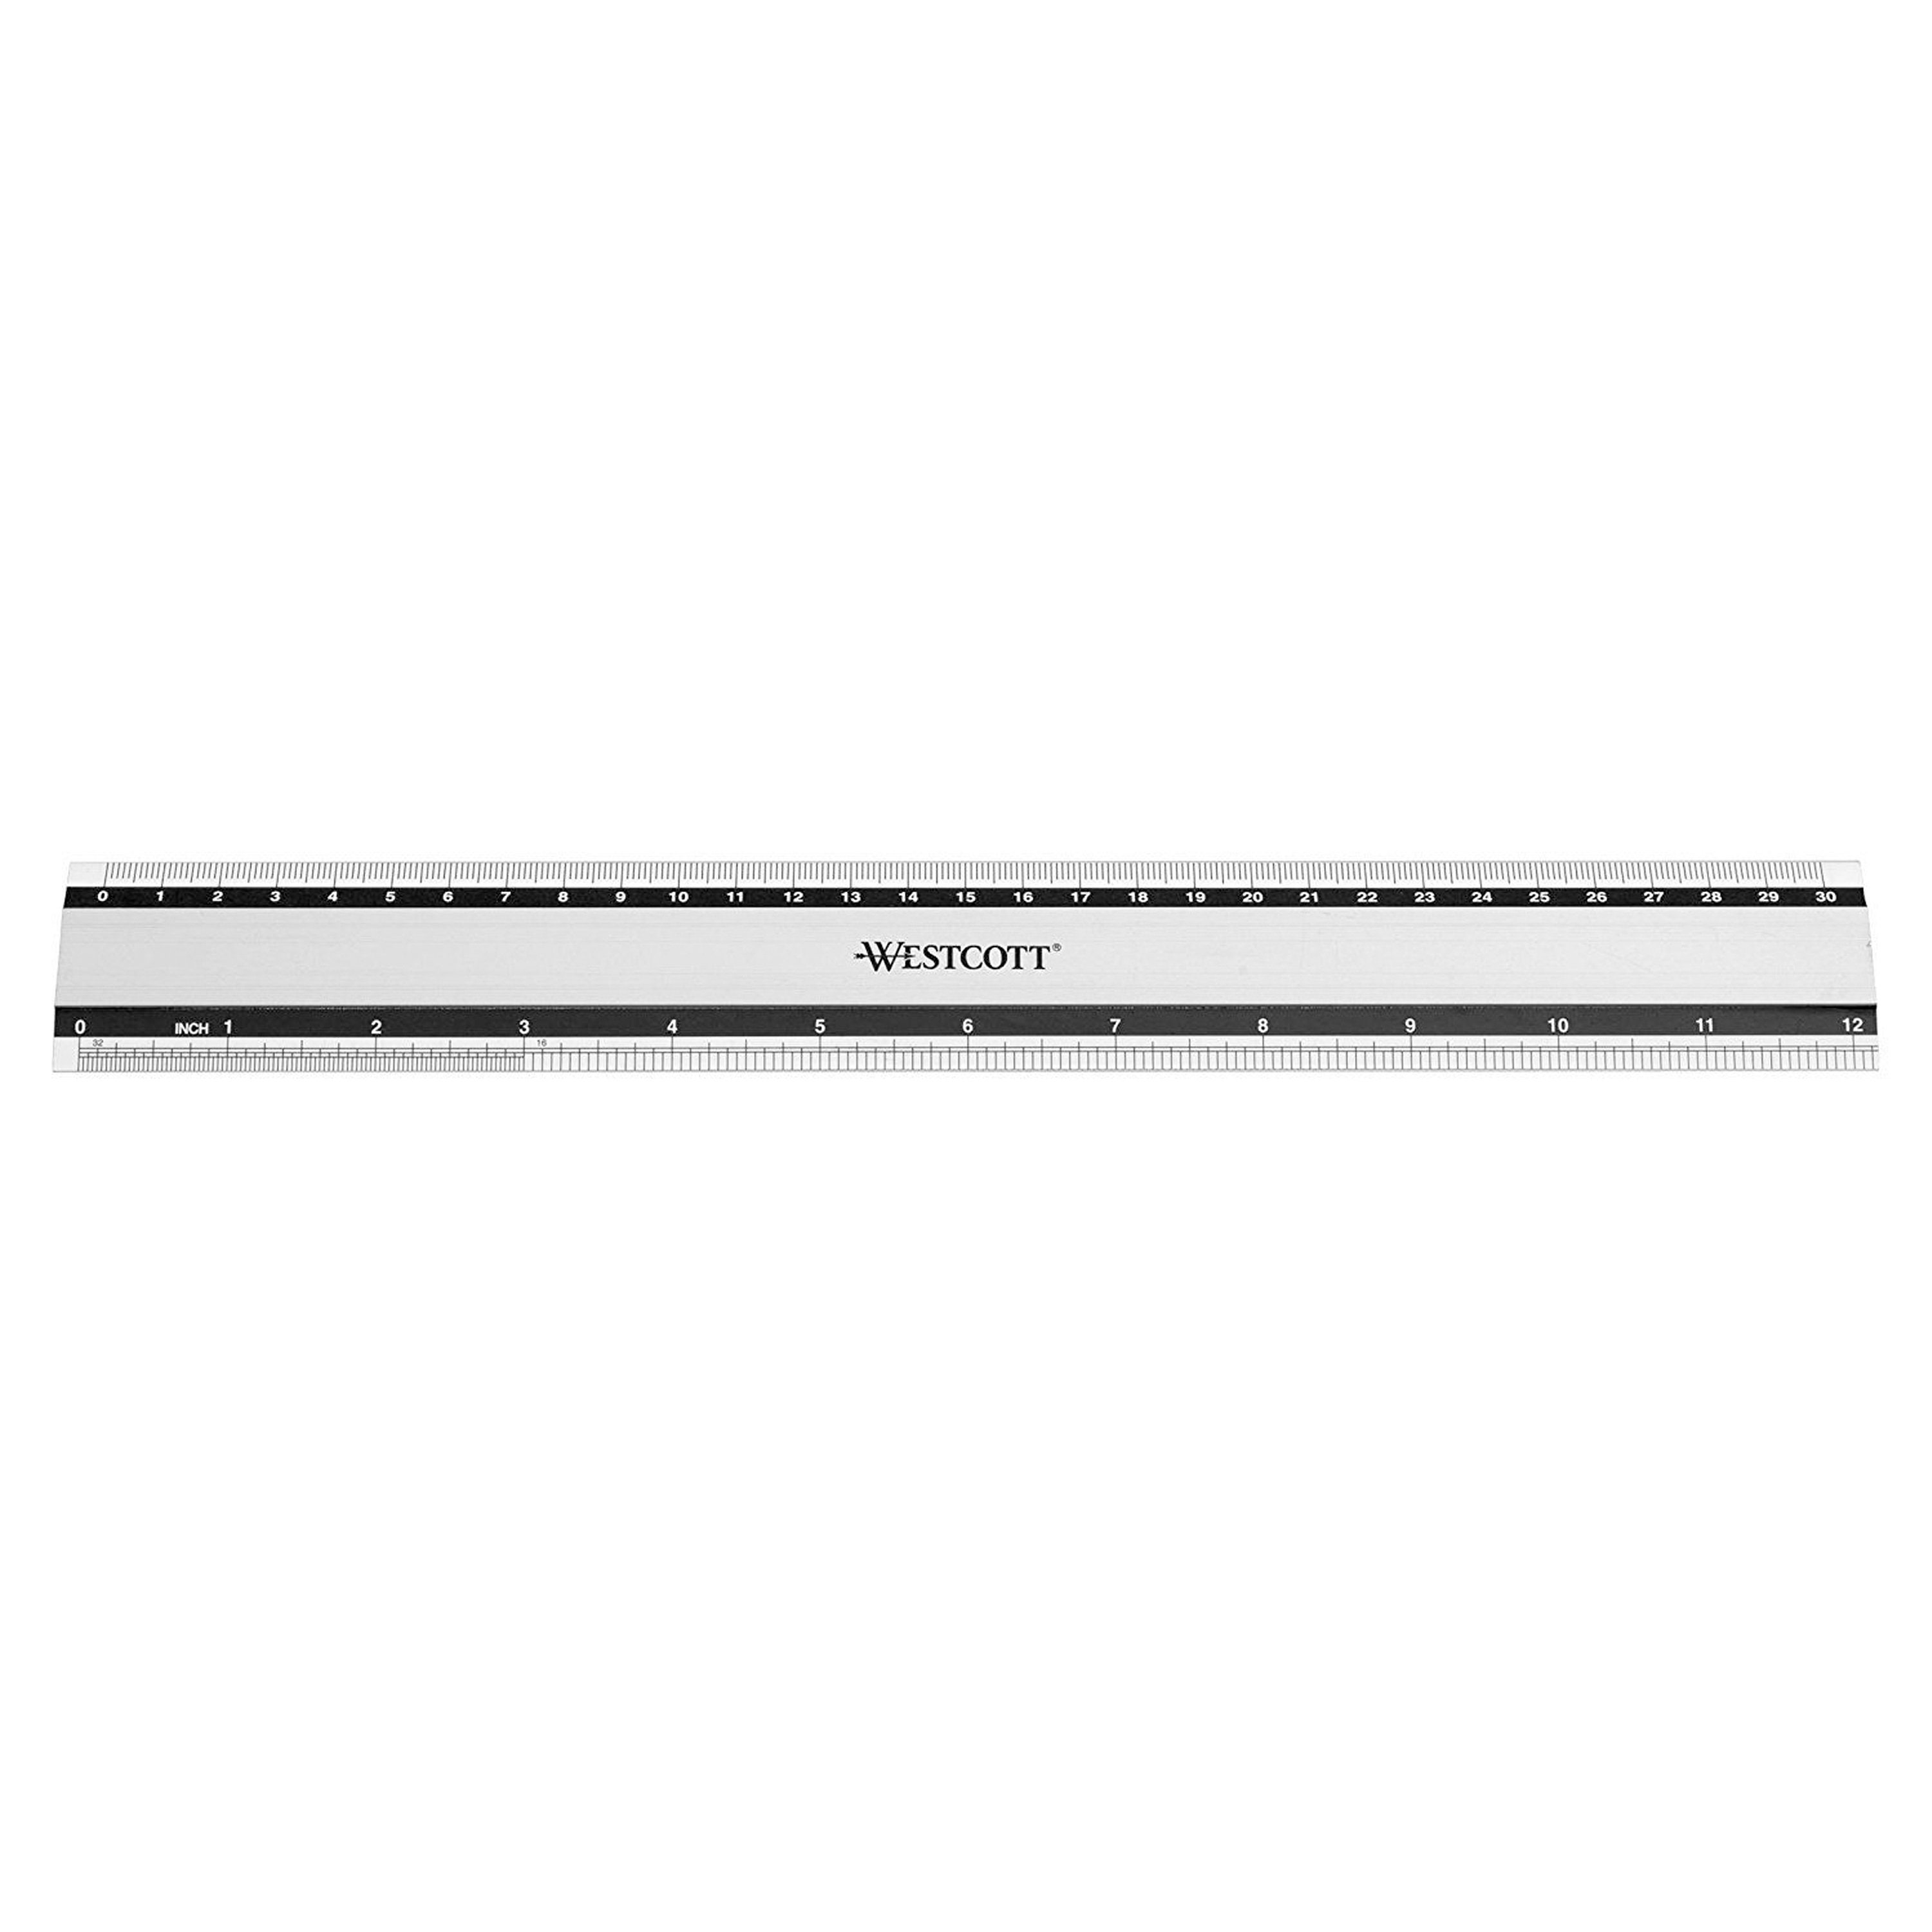 Ruler 30cm 12 Strong Clear Shatter Resistant Plastic Back to